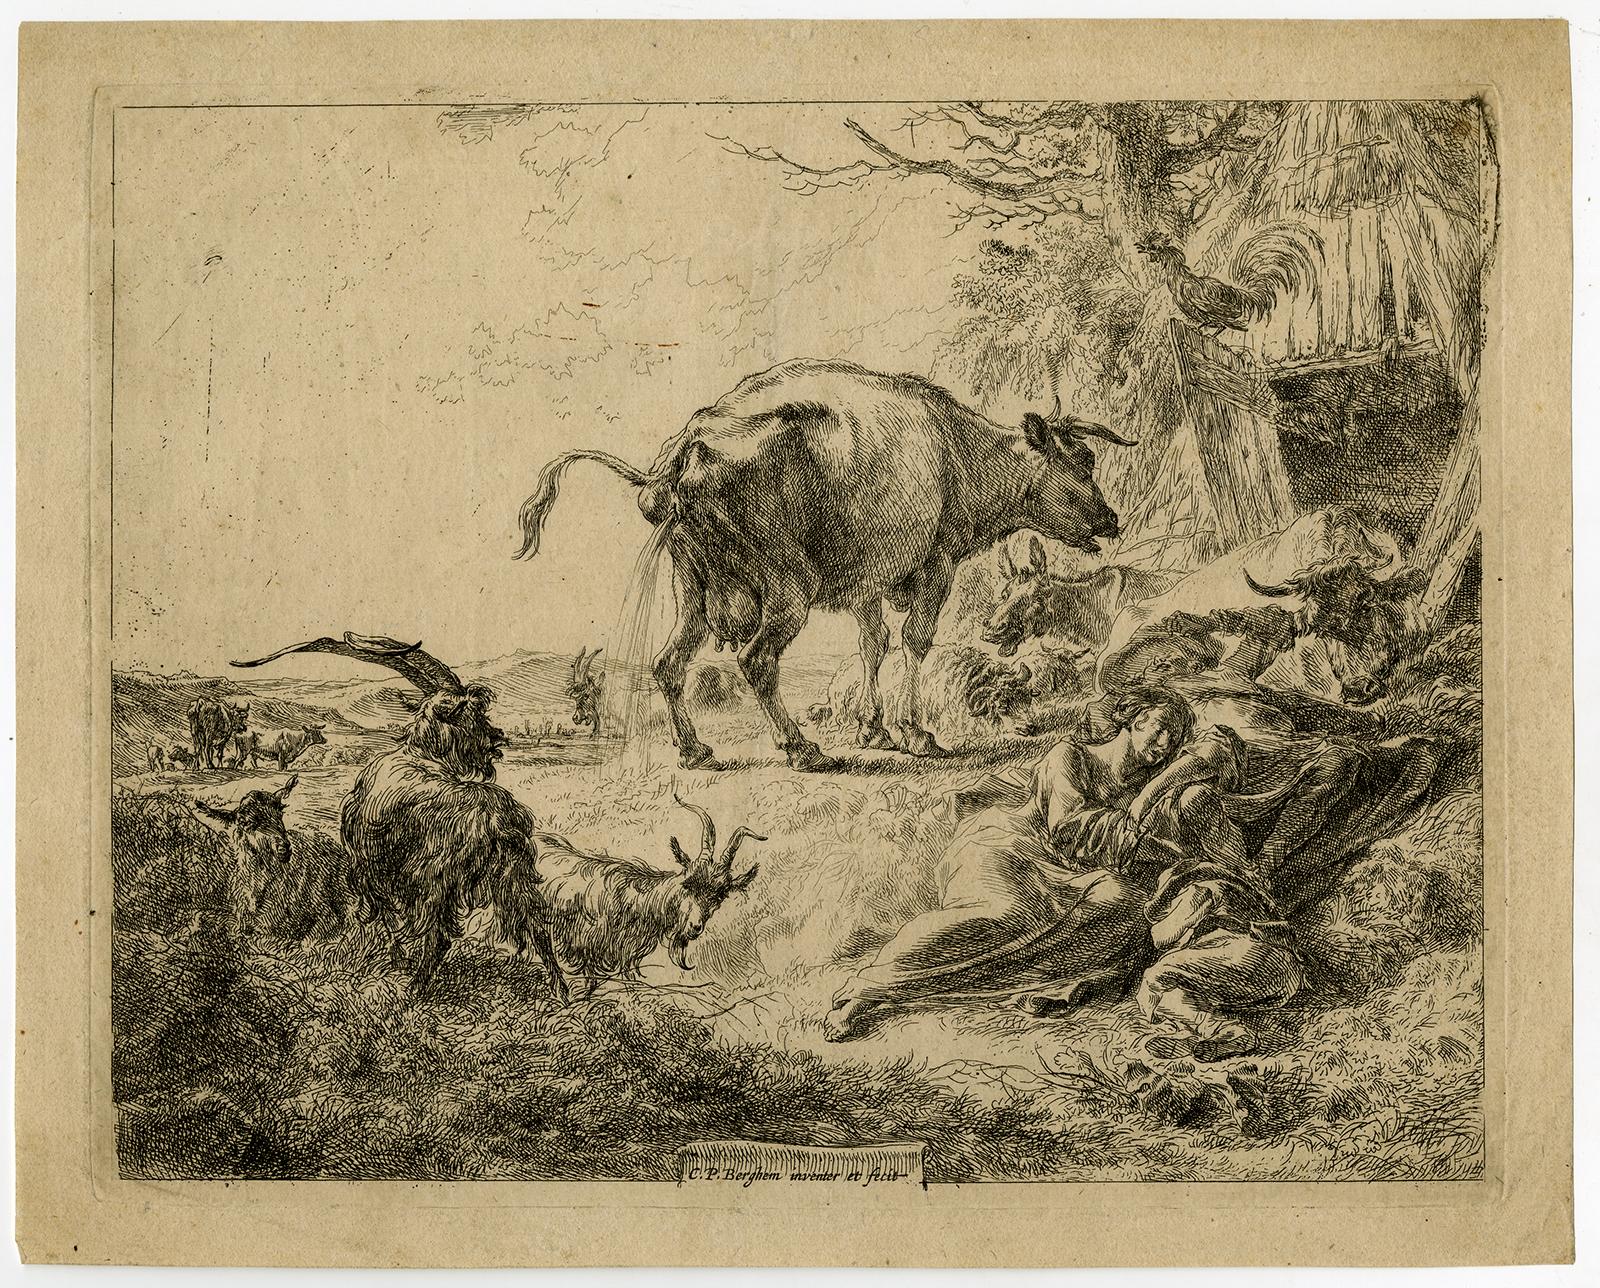 Subject:  Antique Master Print, untitled.  - Landscape with a sleeping shepherdess and a pissing cow. Very good early impression of this famous print.

Description:  Source unknown, to be determined. State: Second state of 5. Ref: Hollstein